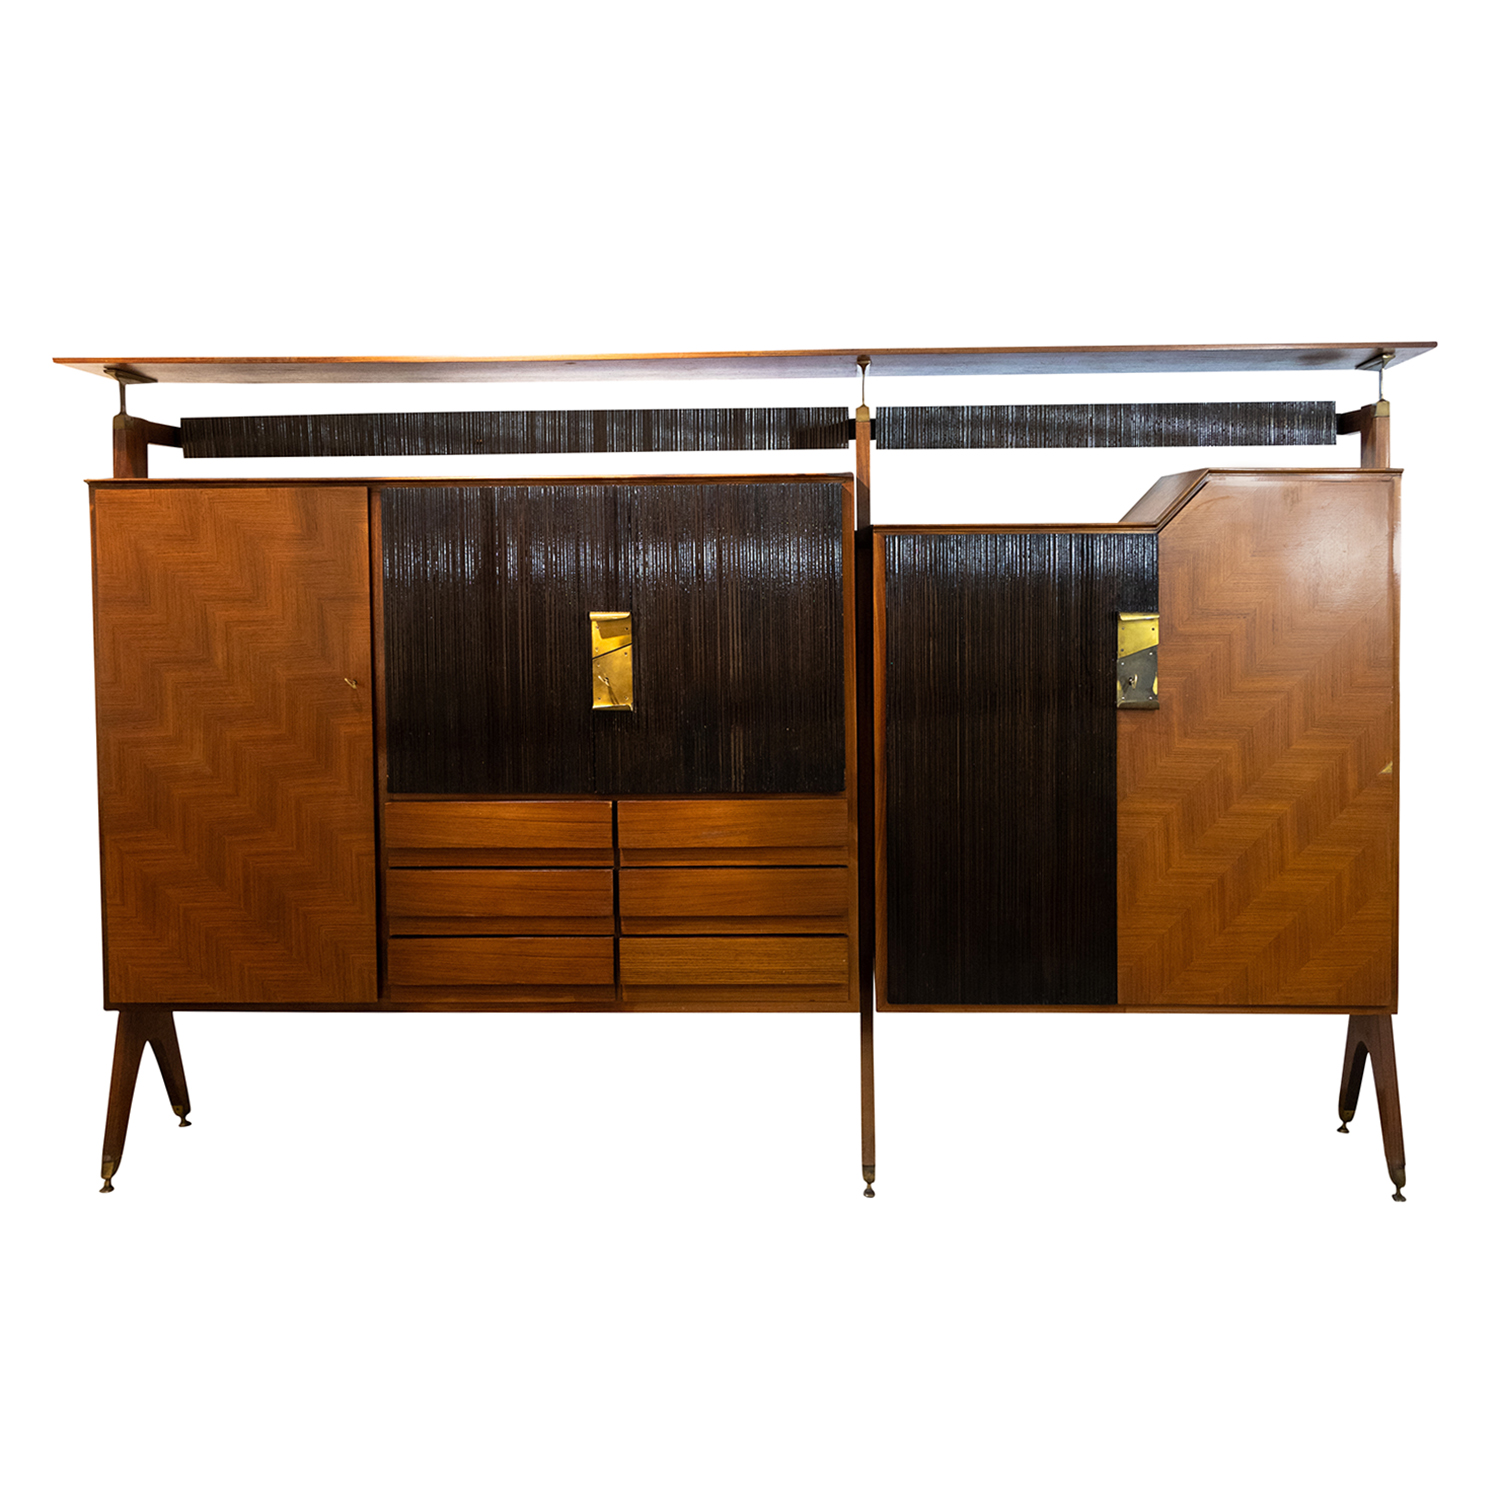 A vintage Mid-Century modern Italian two-part cocktail bar cabinet made of Rosewood and Walnut by Osvaldo Borsani. Circa 1940 - 1960, Italy.